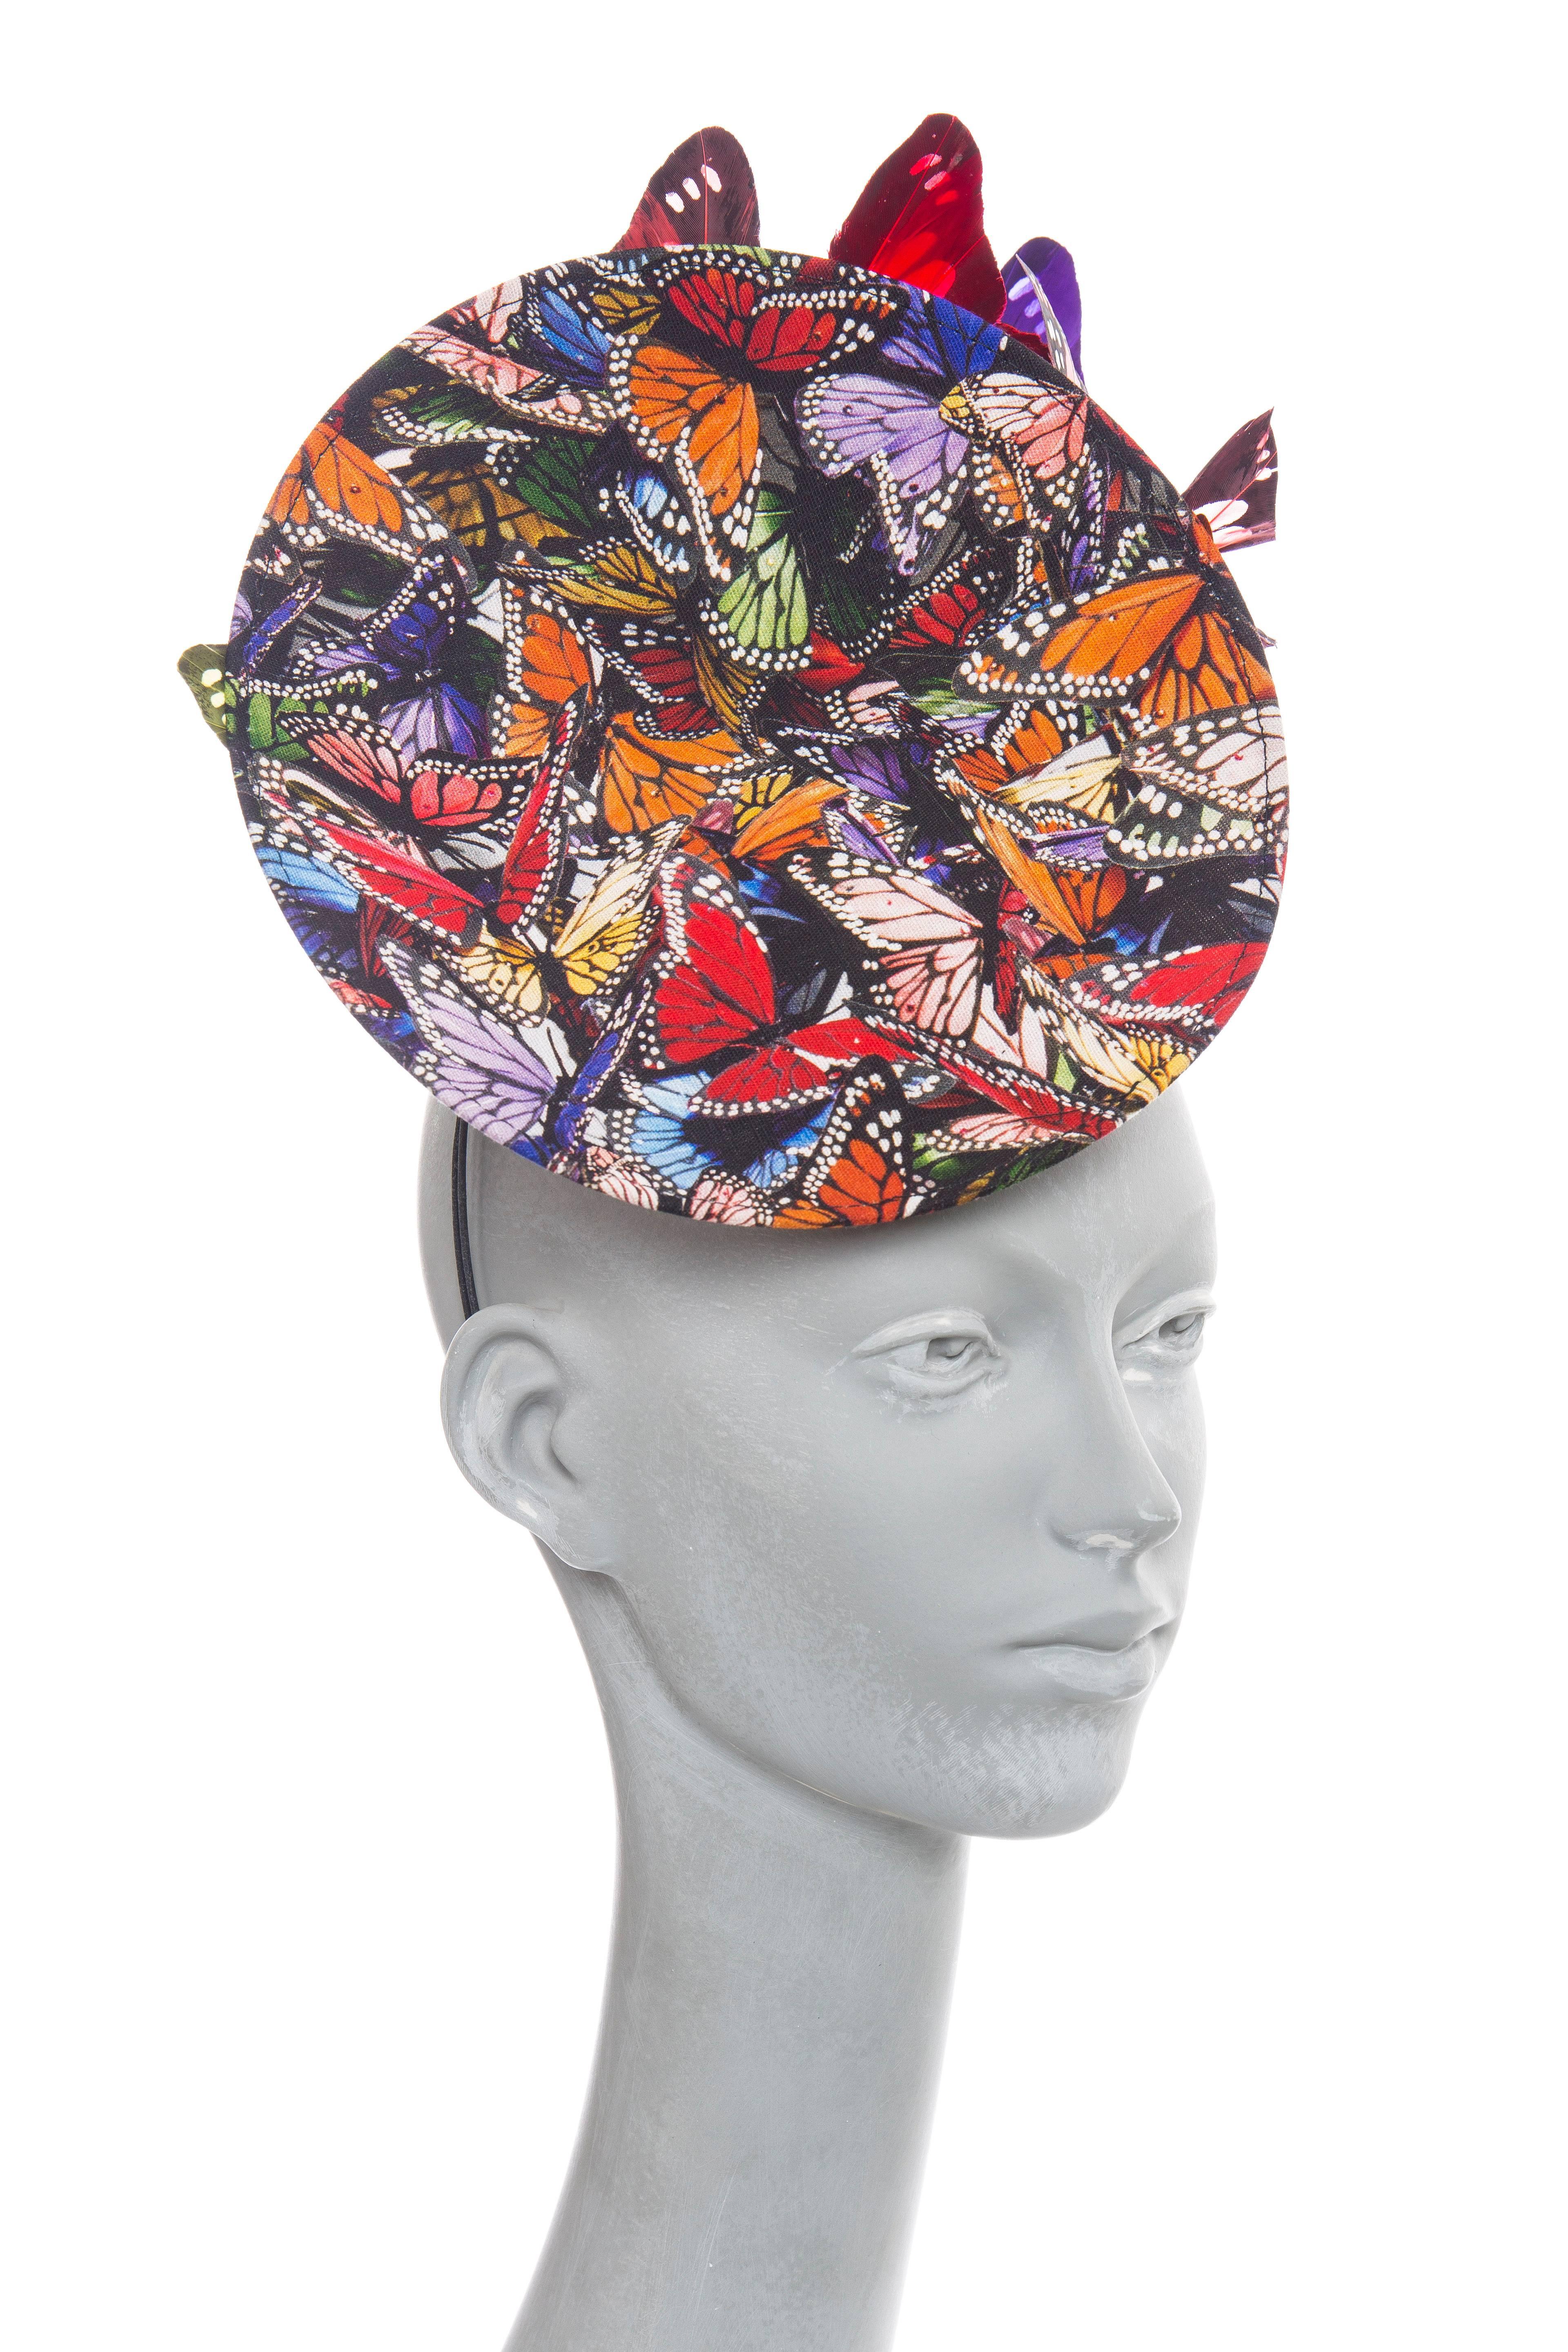 Philip Treacy, circa 2003, wired polychrome fascinator with hat box autographed by the milliner.
